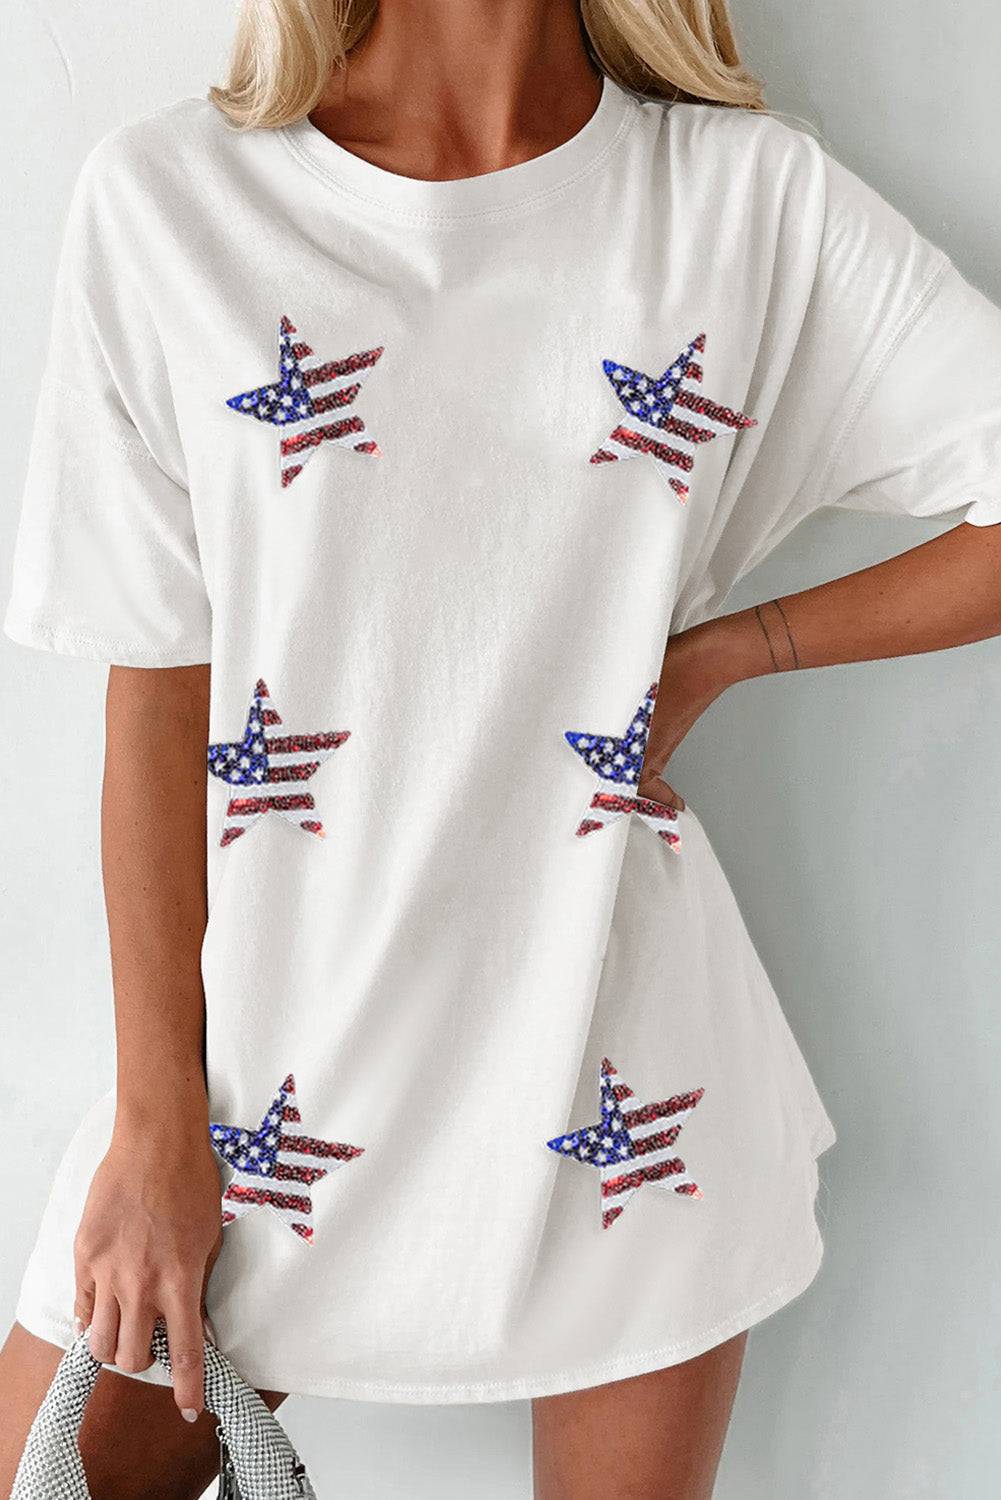 a woman wearing a white shirt with american flags on it